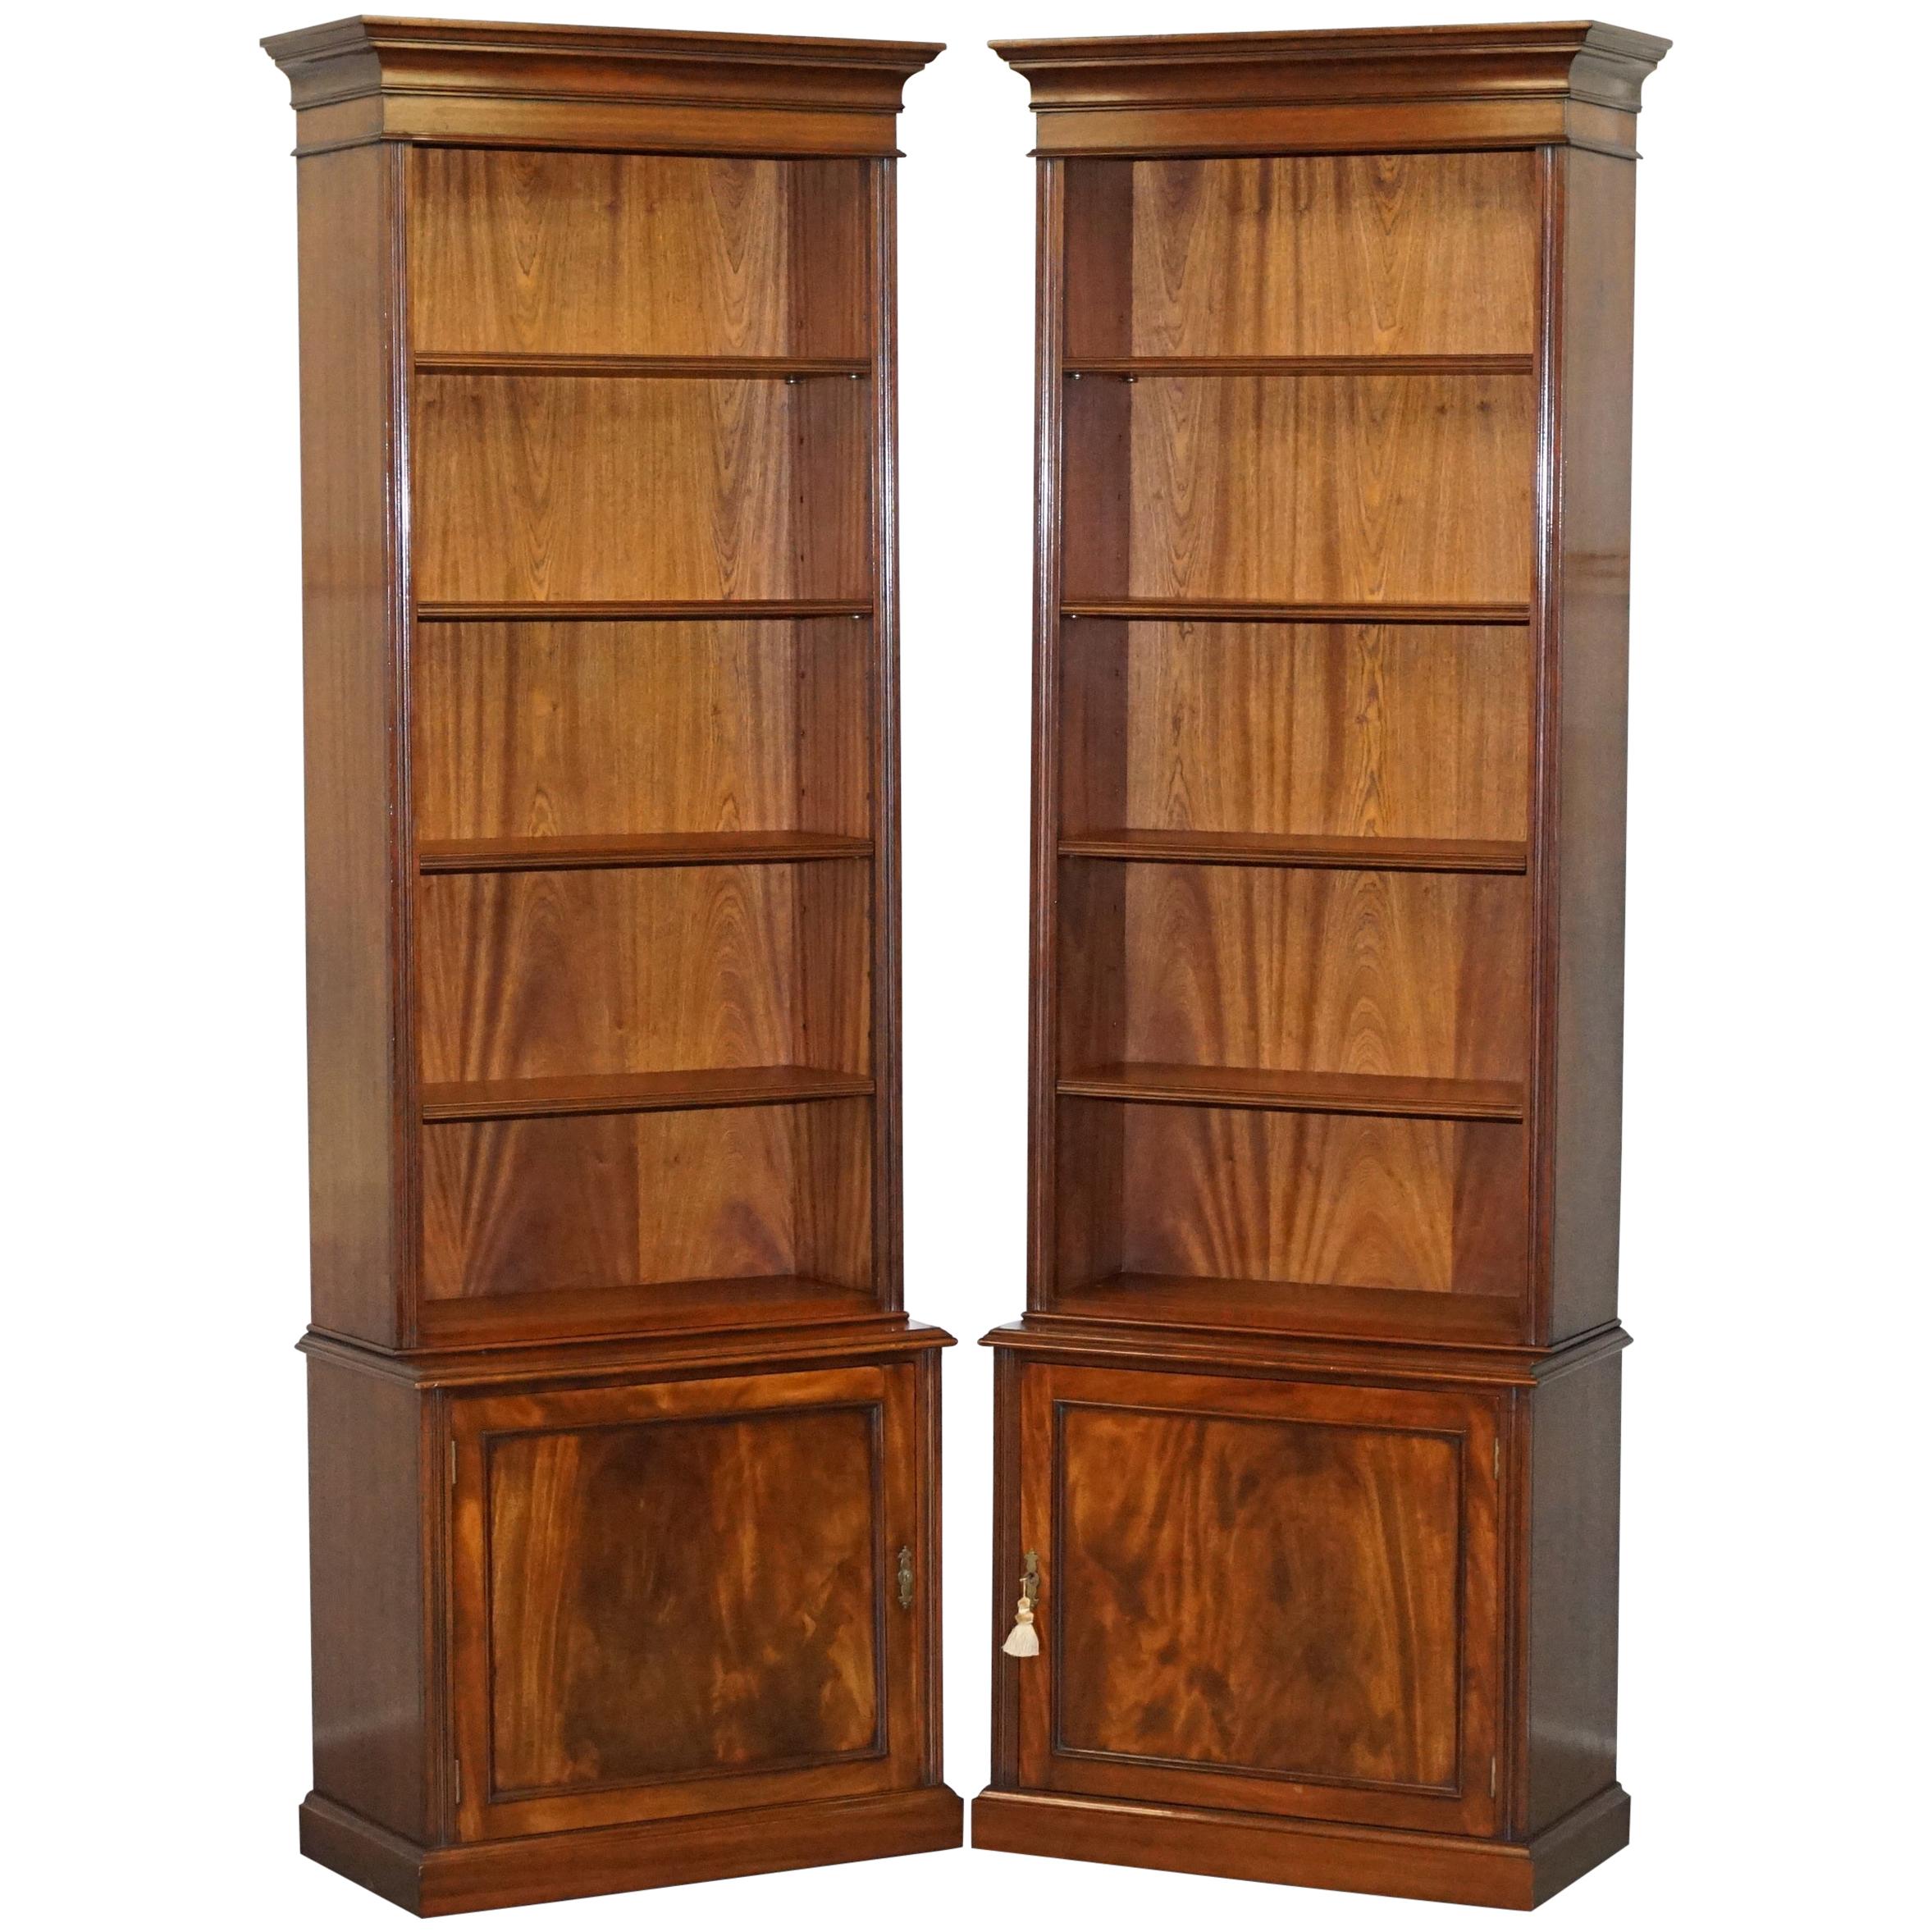 Lovely Pair of Vintage Flamed Mahogany Library Bookcases with Cupboard Bases